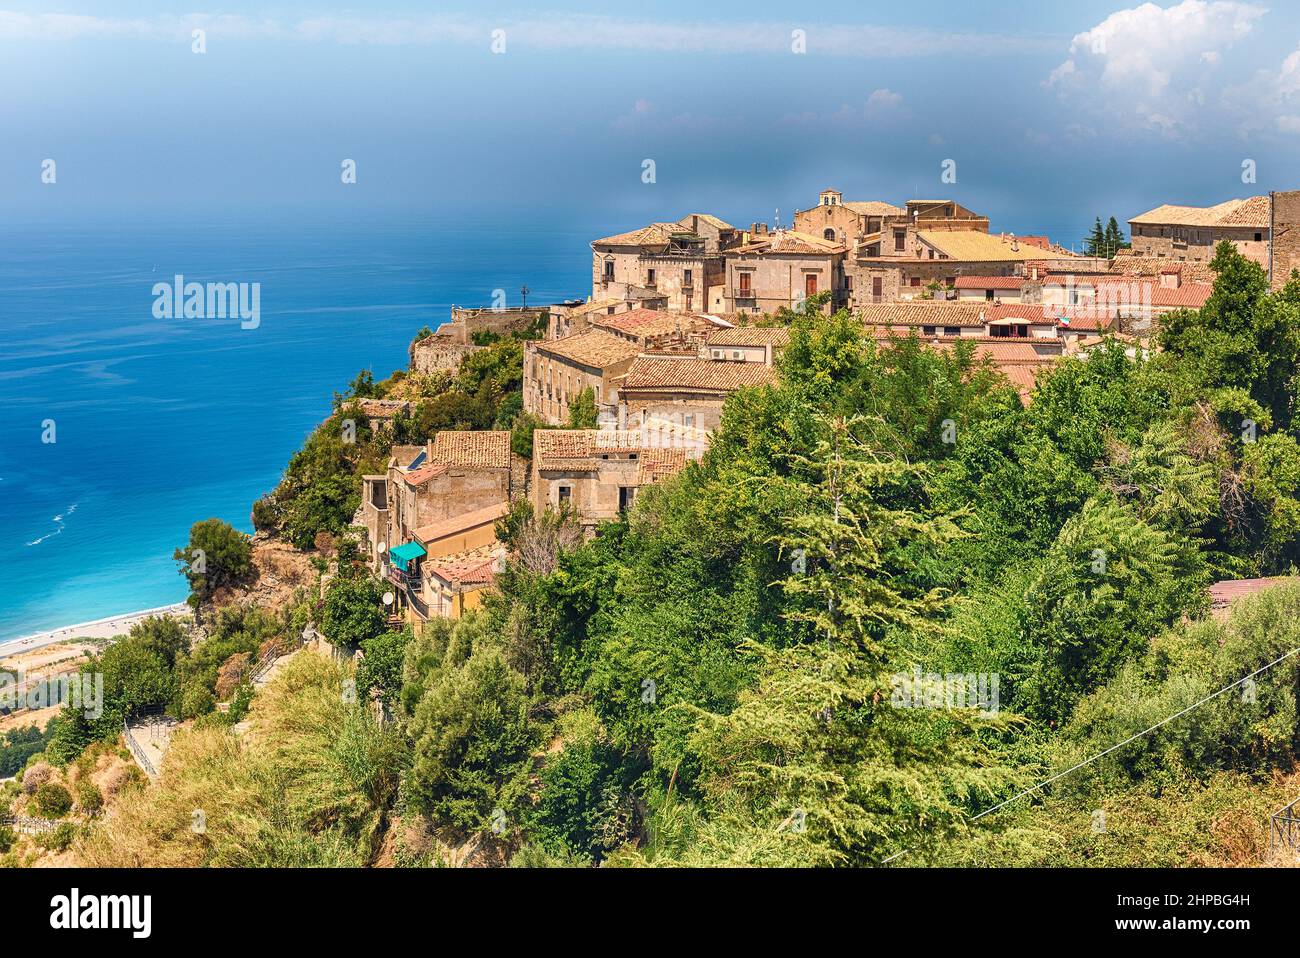 Scenic view of Fiumefreddo Bruzio, picturesque town on the Thyrrenean coast in Province of Cosenza, Italy Stock Photo